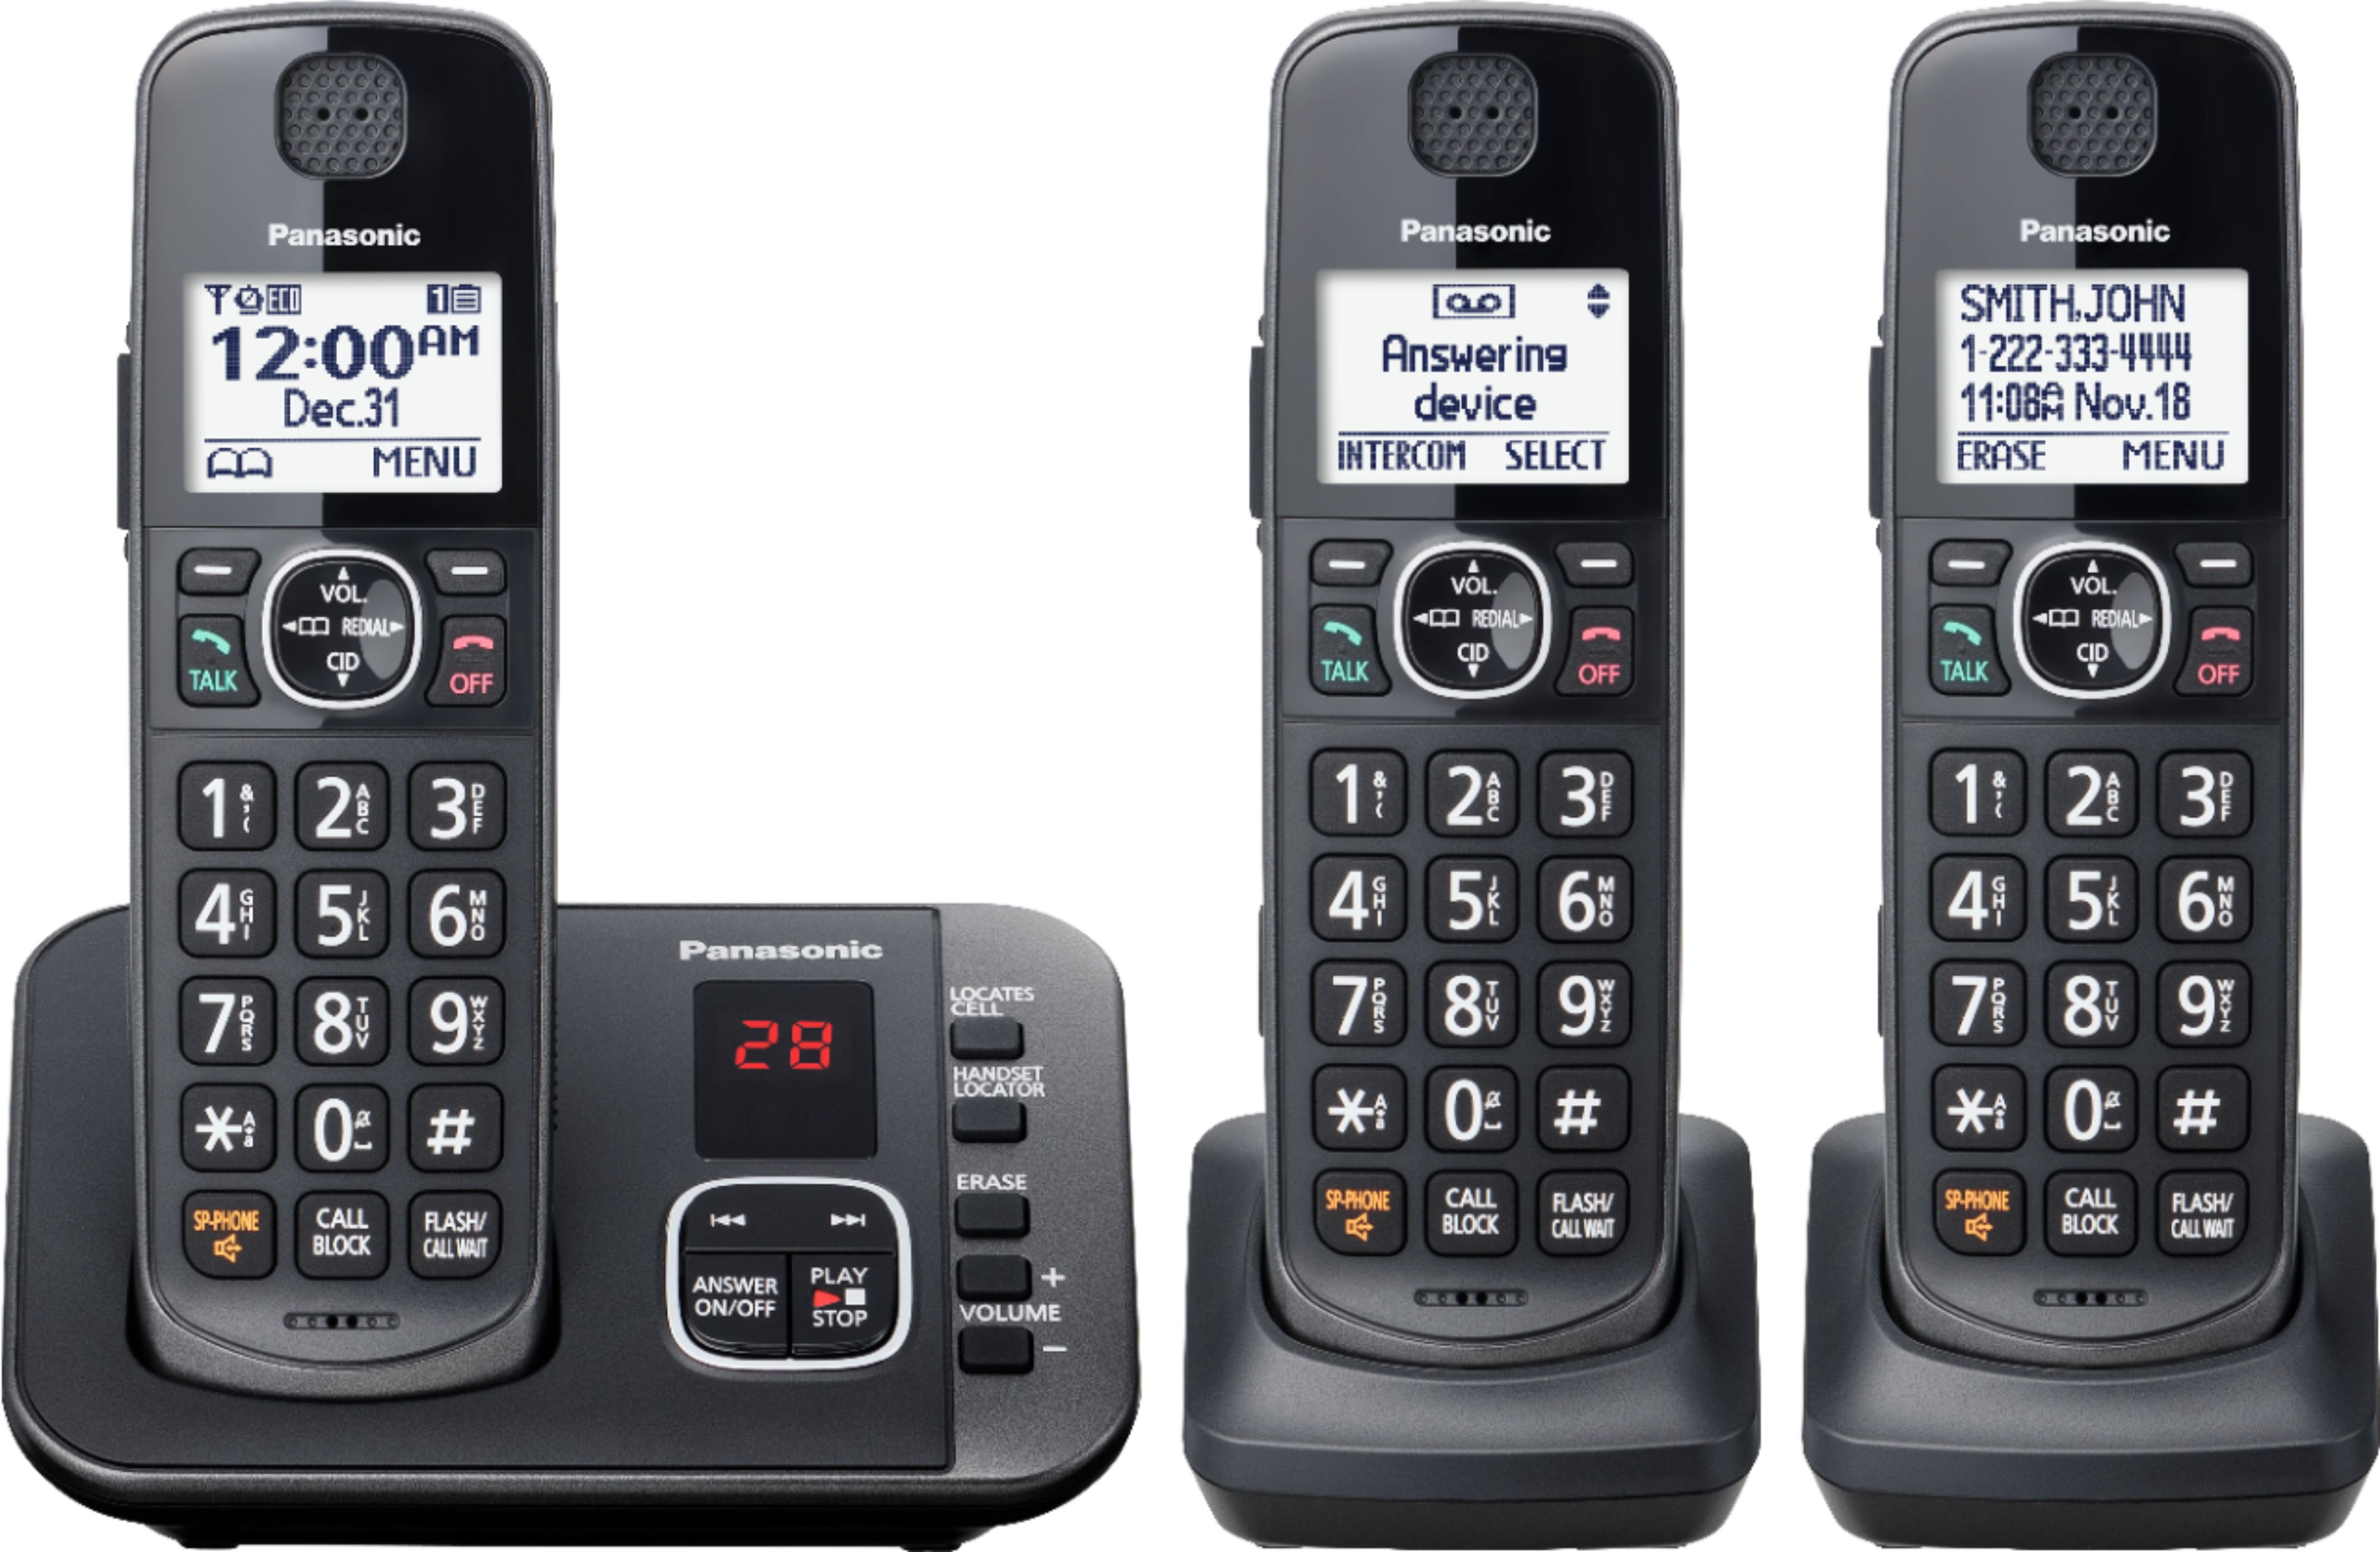 KX-TGD630M 1 Cordless Handsets Panasonic Expandable Cordless Phone System with Call Block and Answering Machine Metallic Black 